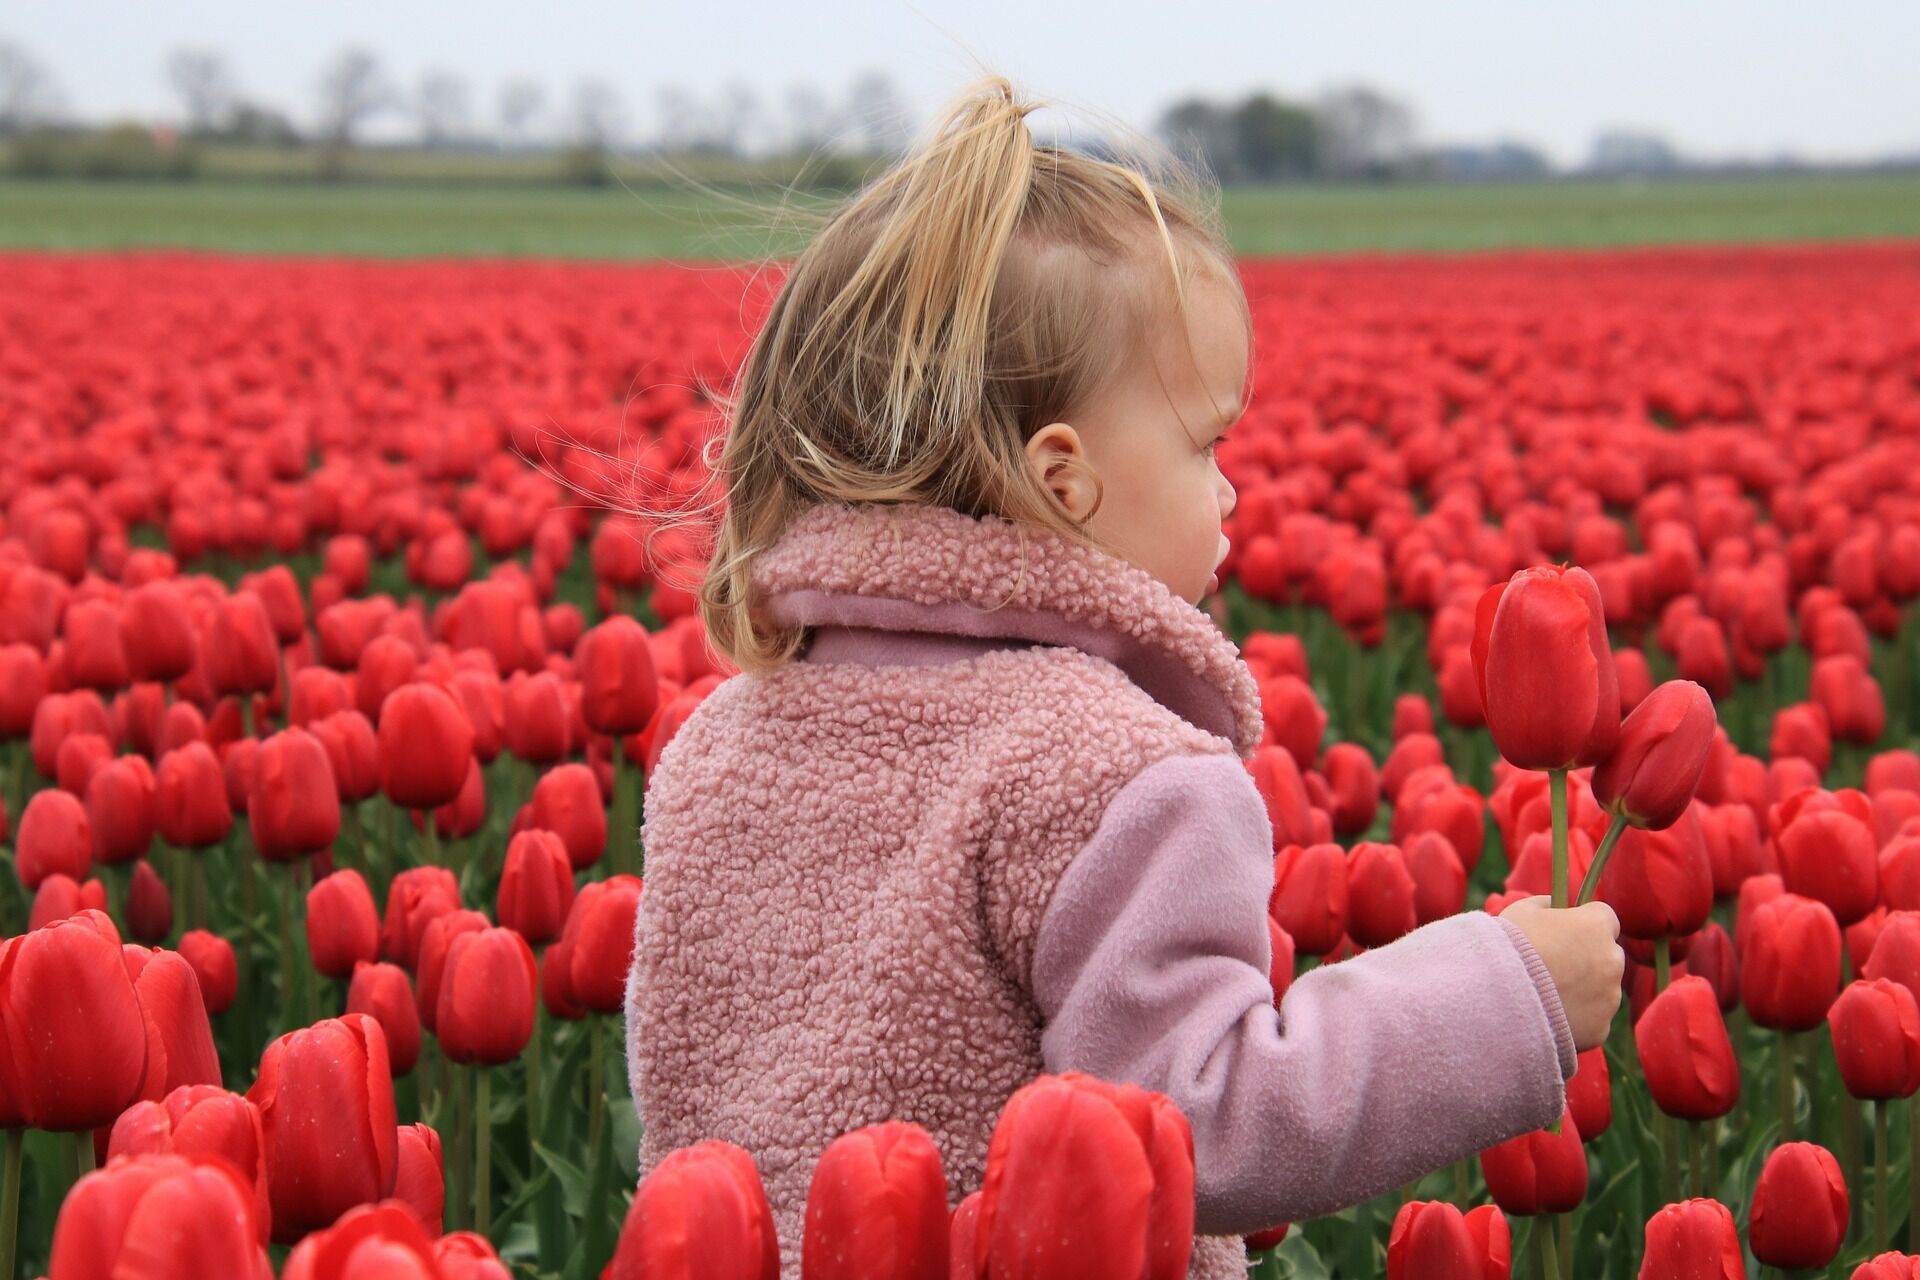 A family trip to the Netherlands: how to spend time and what to see